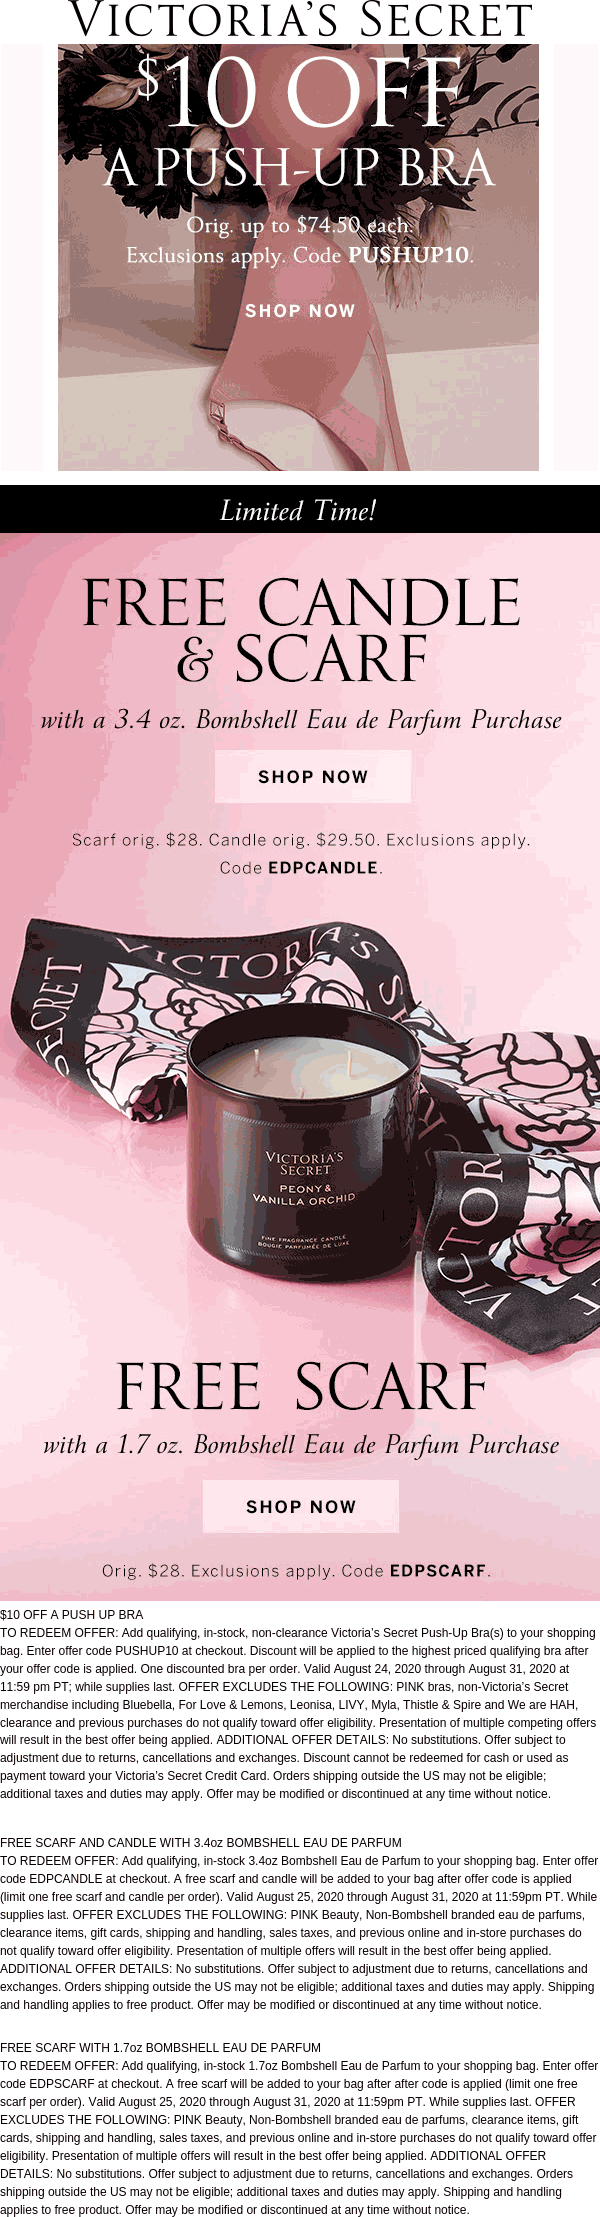 Victorias Secret stores Coupon  $10 off pushup bra & free candle + scarf with Bombshell at Victorias Secret via promo code PUSHUP10 or EDPCANDLE #victoriassecret 